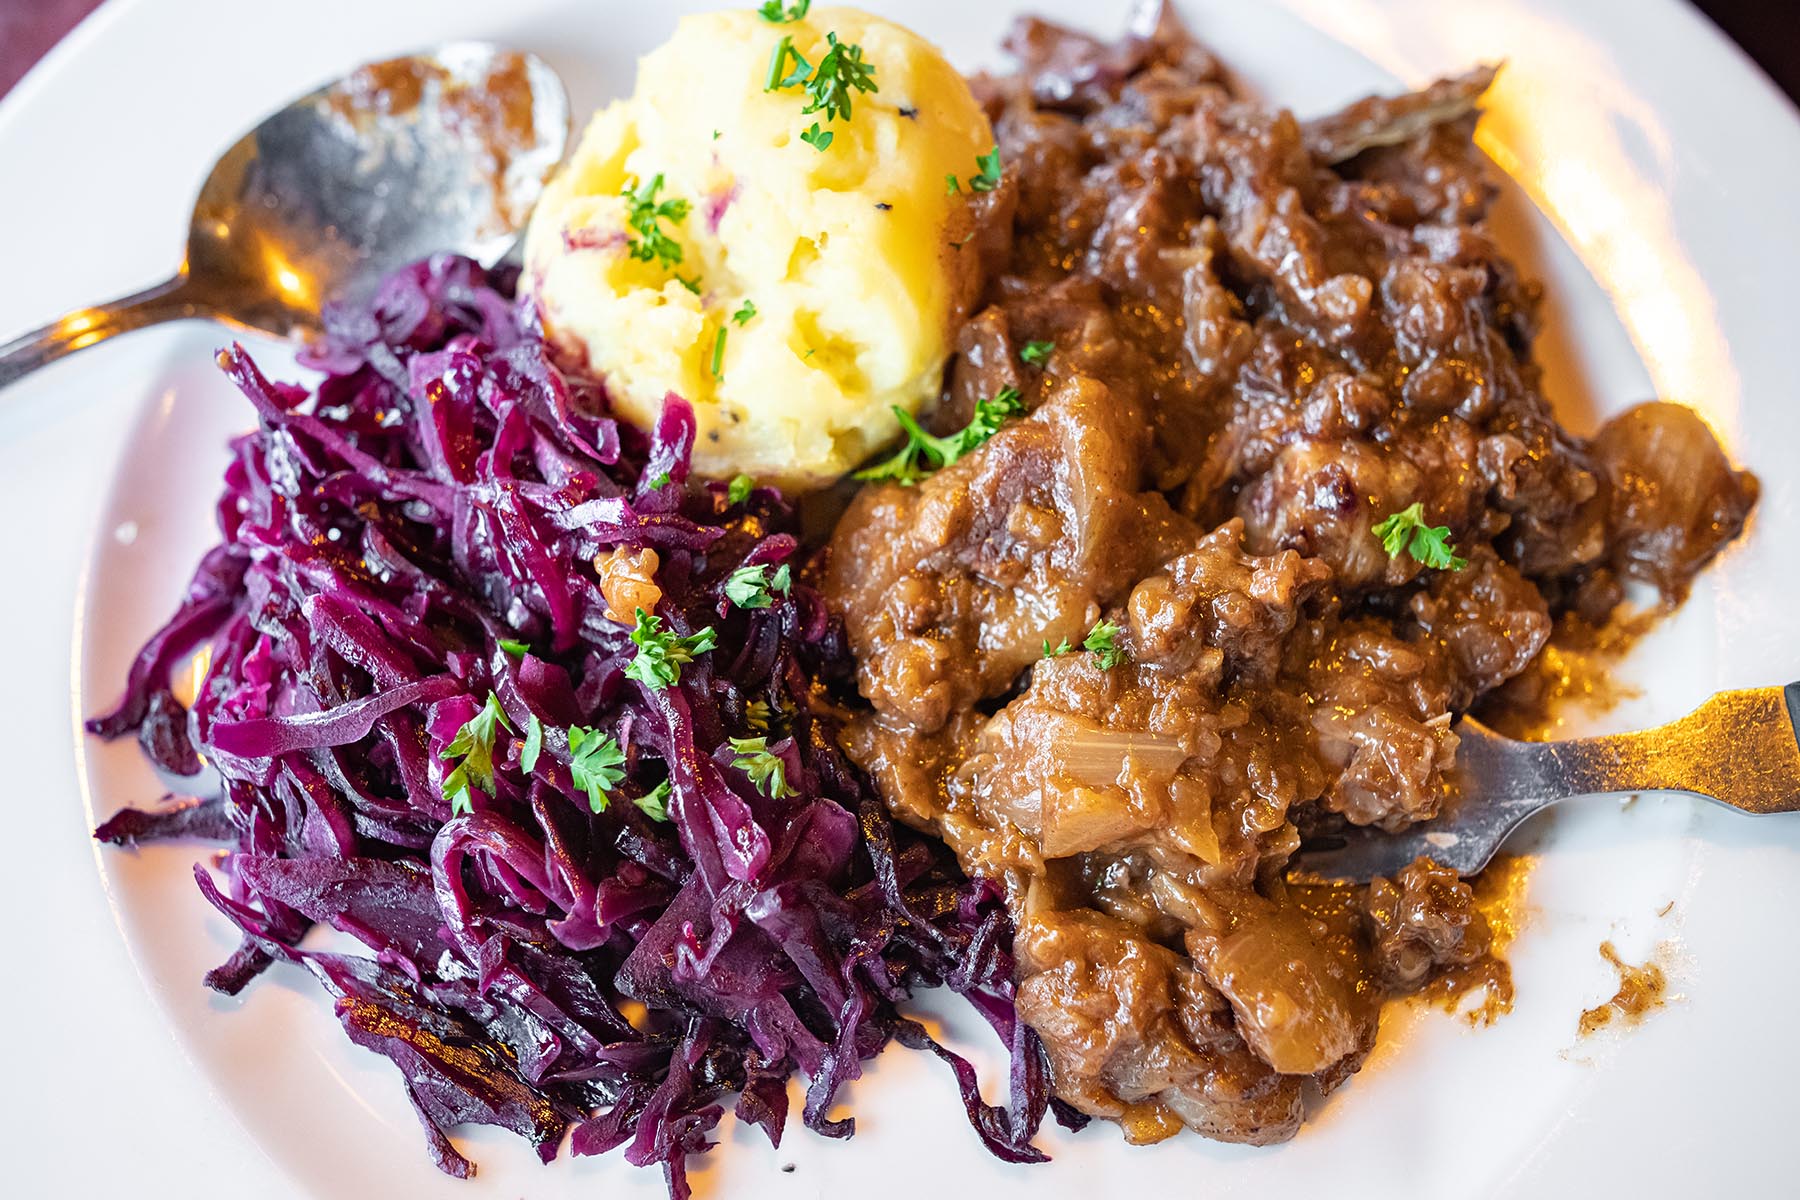 Hachee is typically served with mashed potatoes and red cabbage.